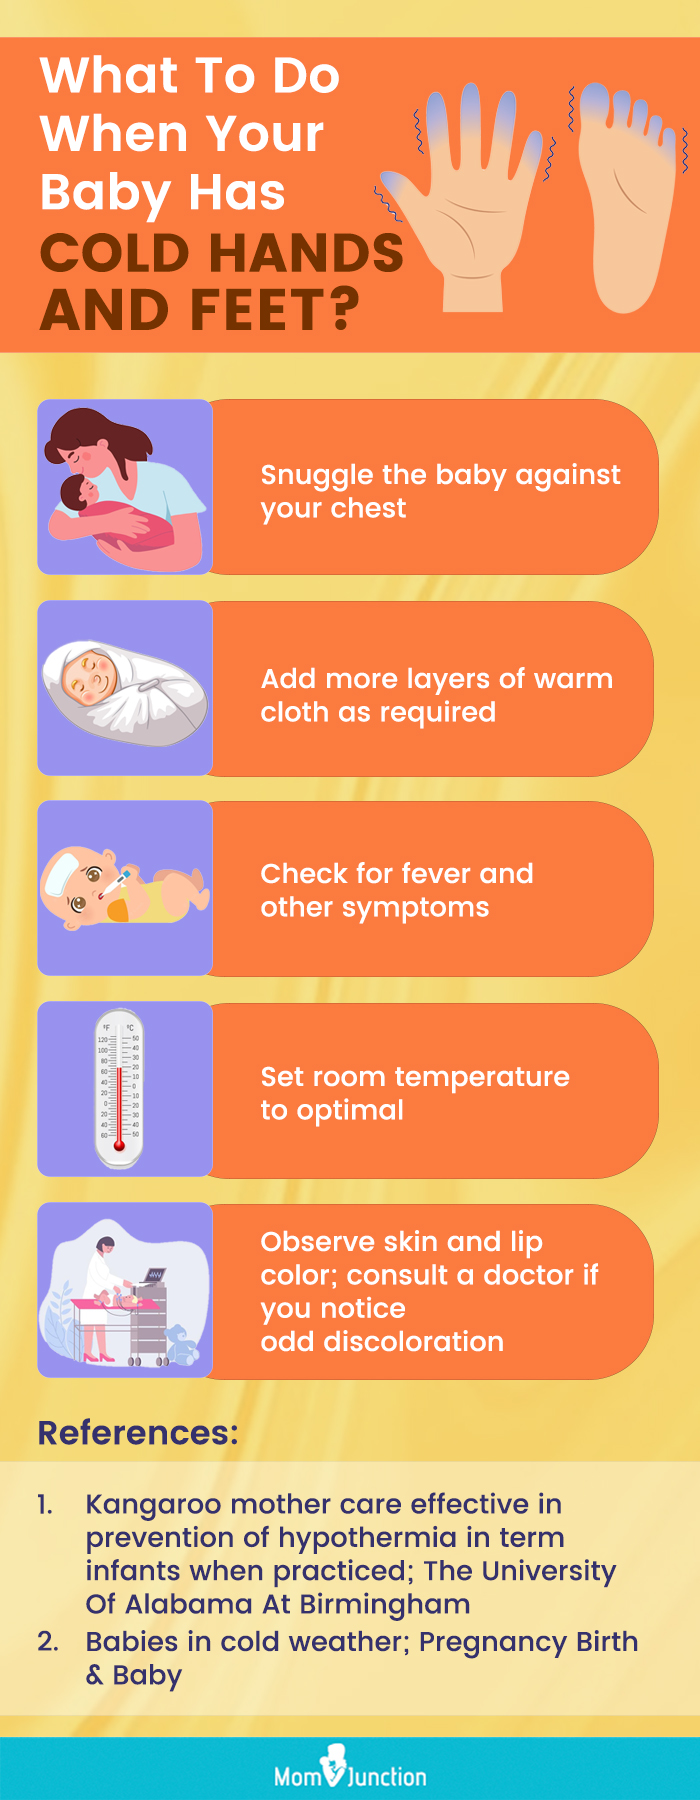 what to do when your baby has cold hands and feet [infographic]